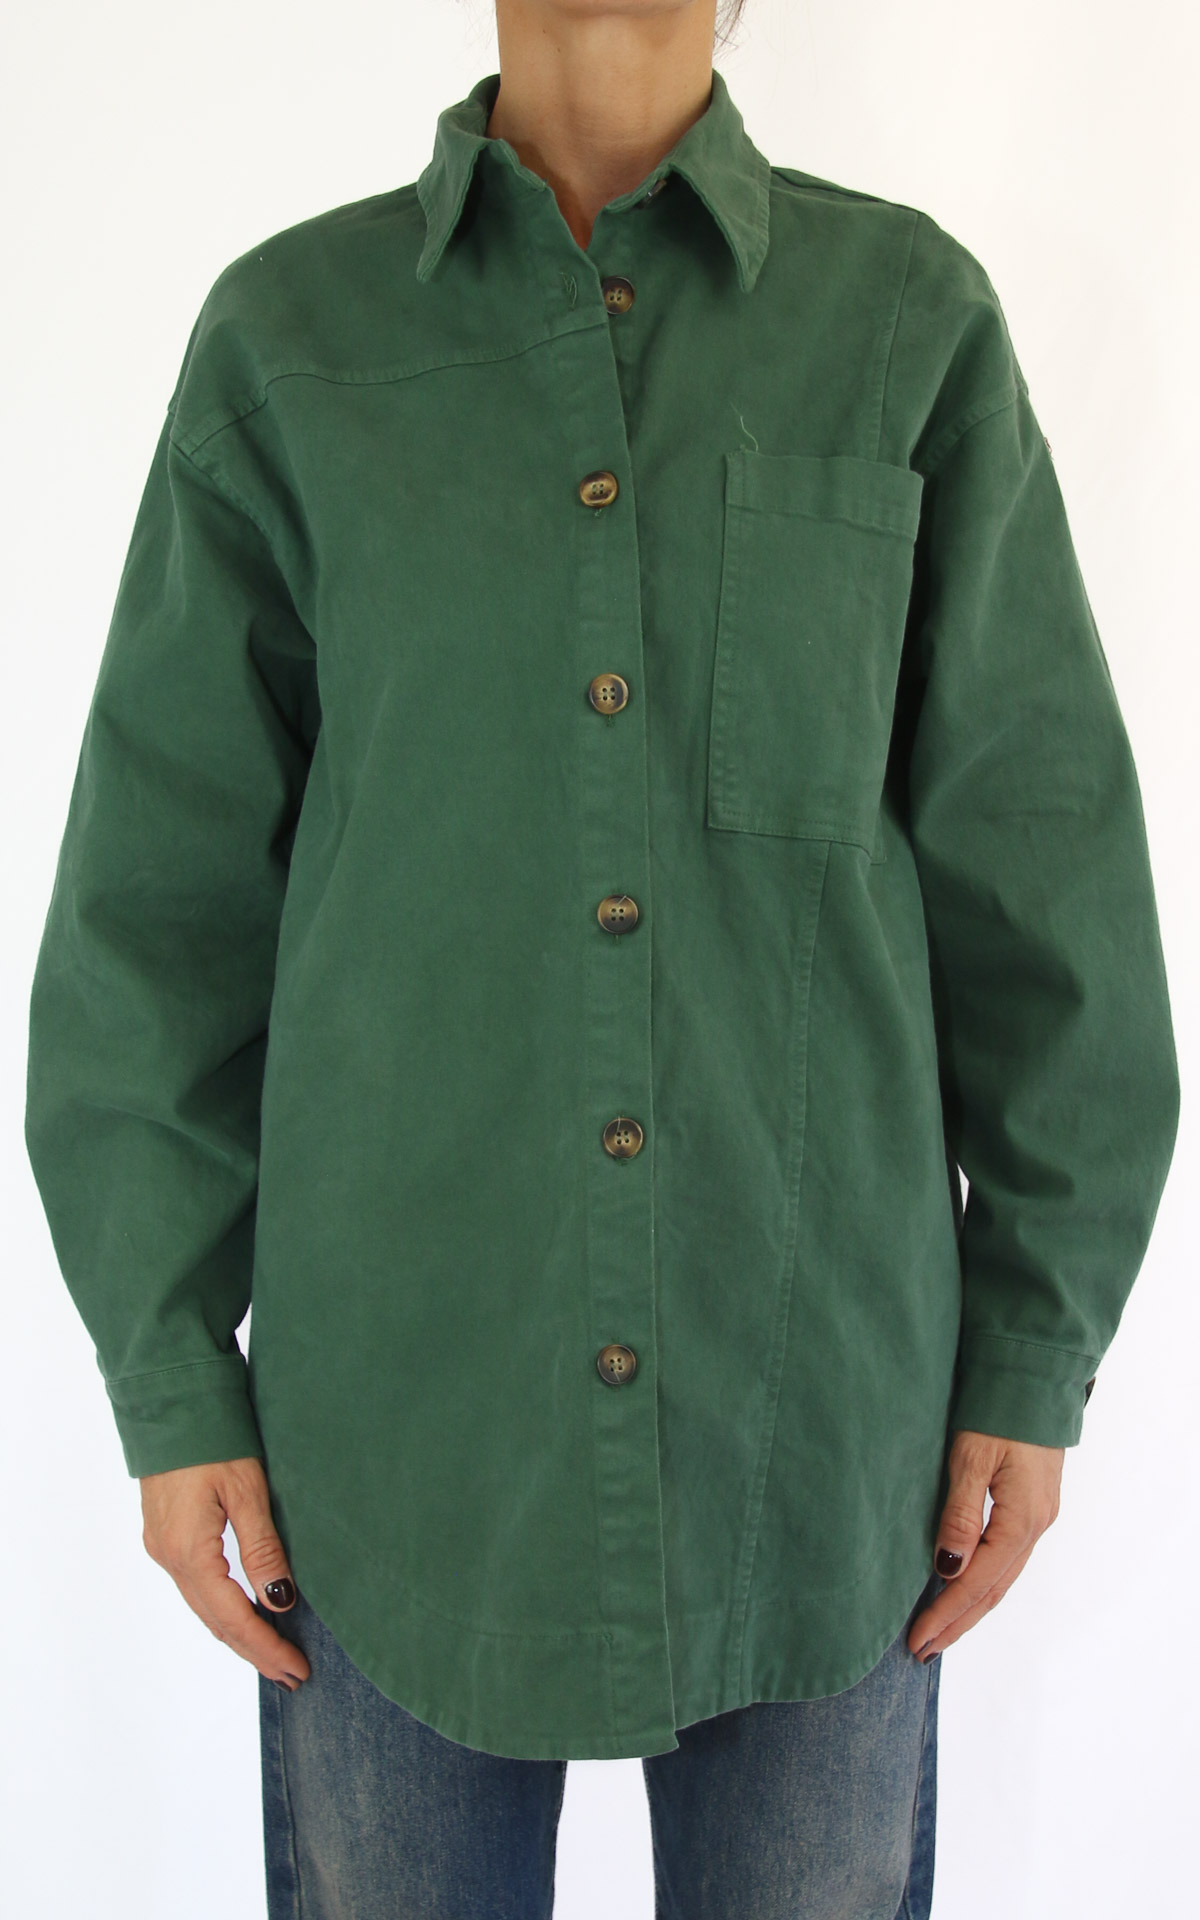 Off-On - giacca oversize - verde